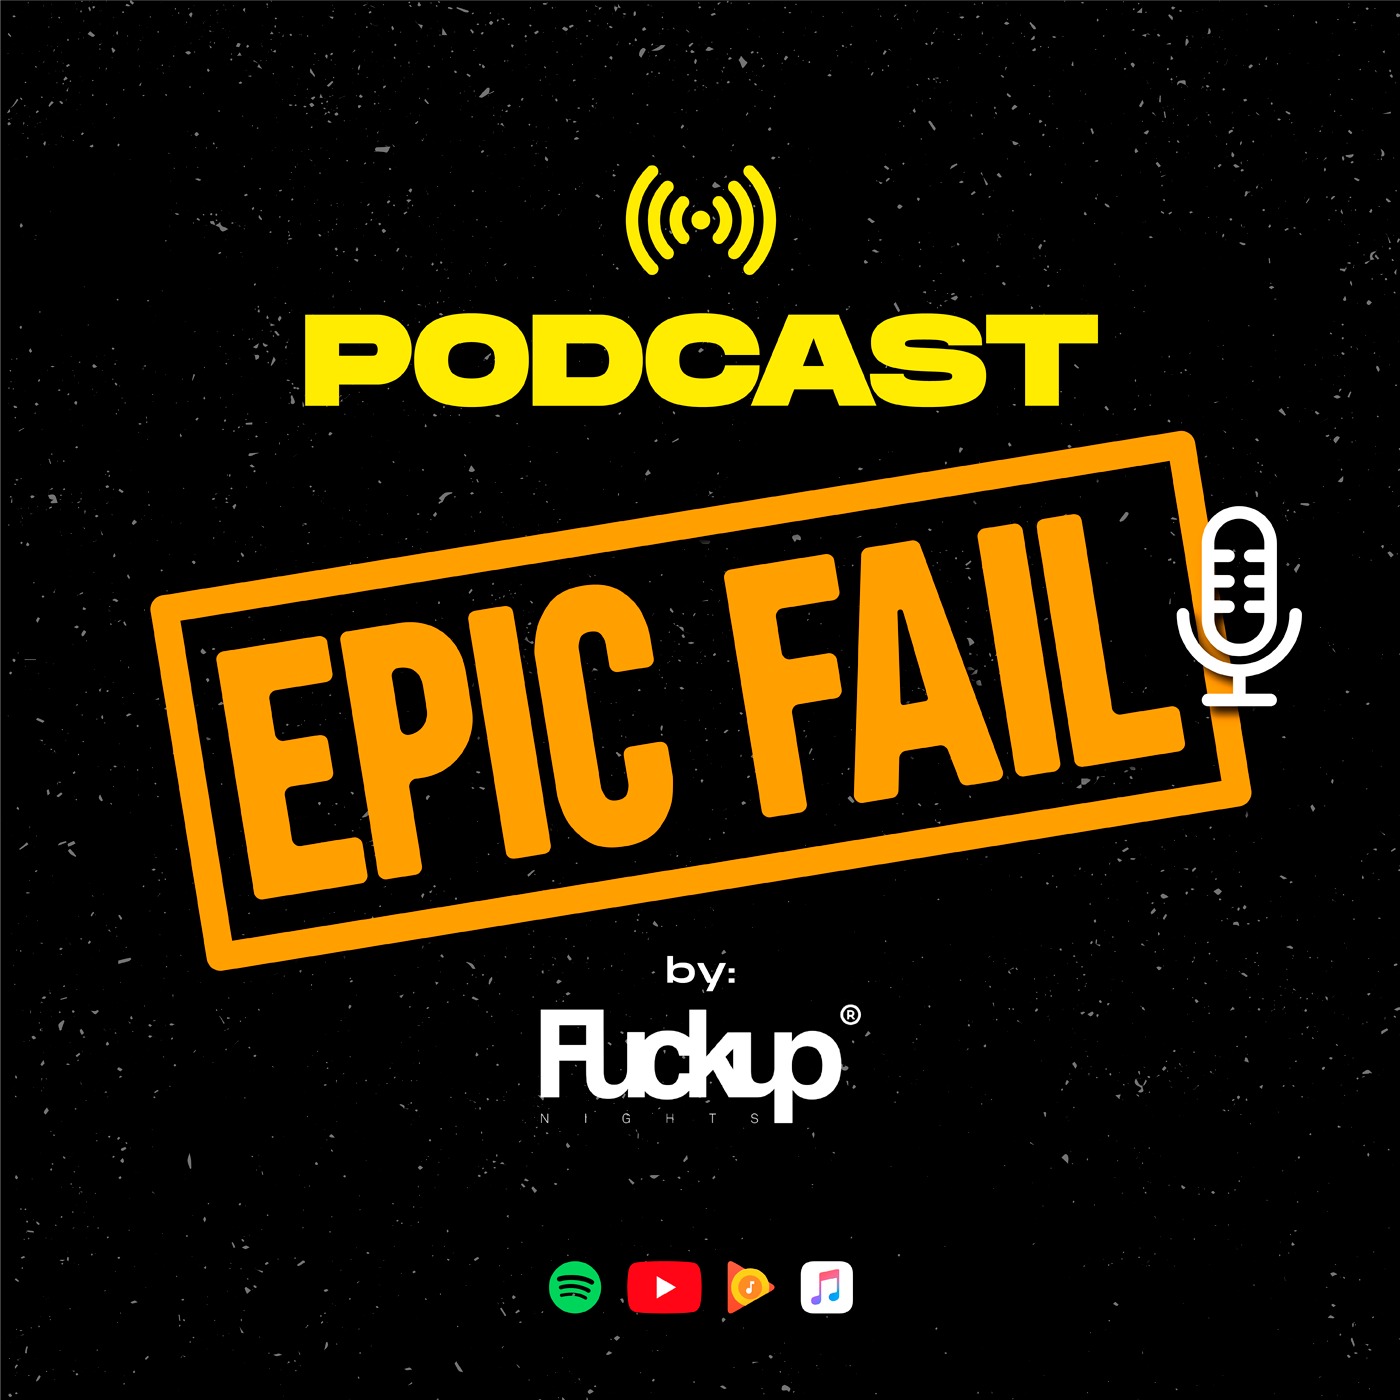 Podcast - EpicFail By Fuck Up Nights Mérida:Fuck Up Nights Mérida